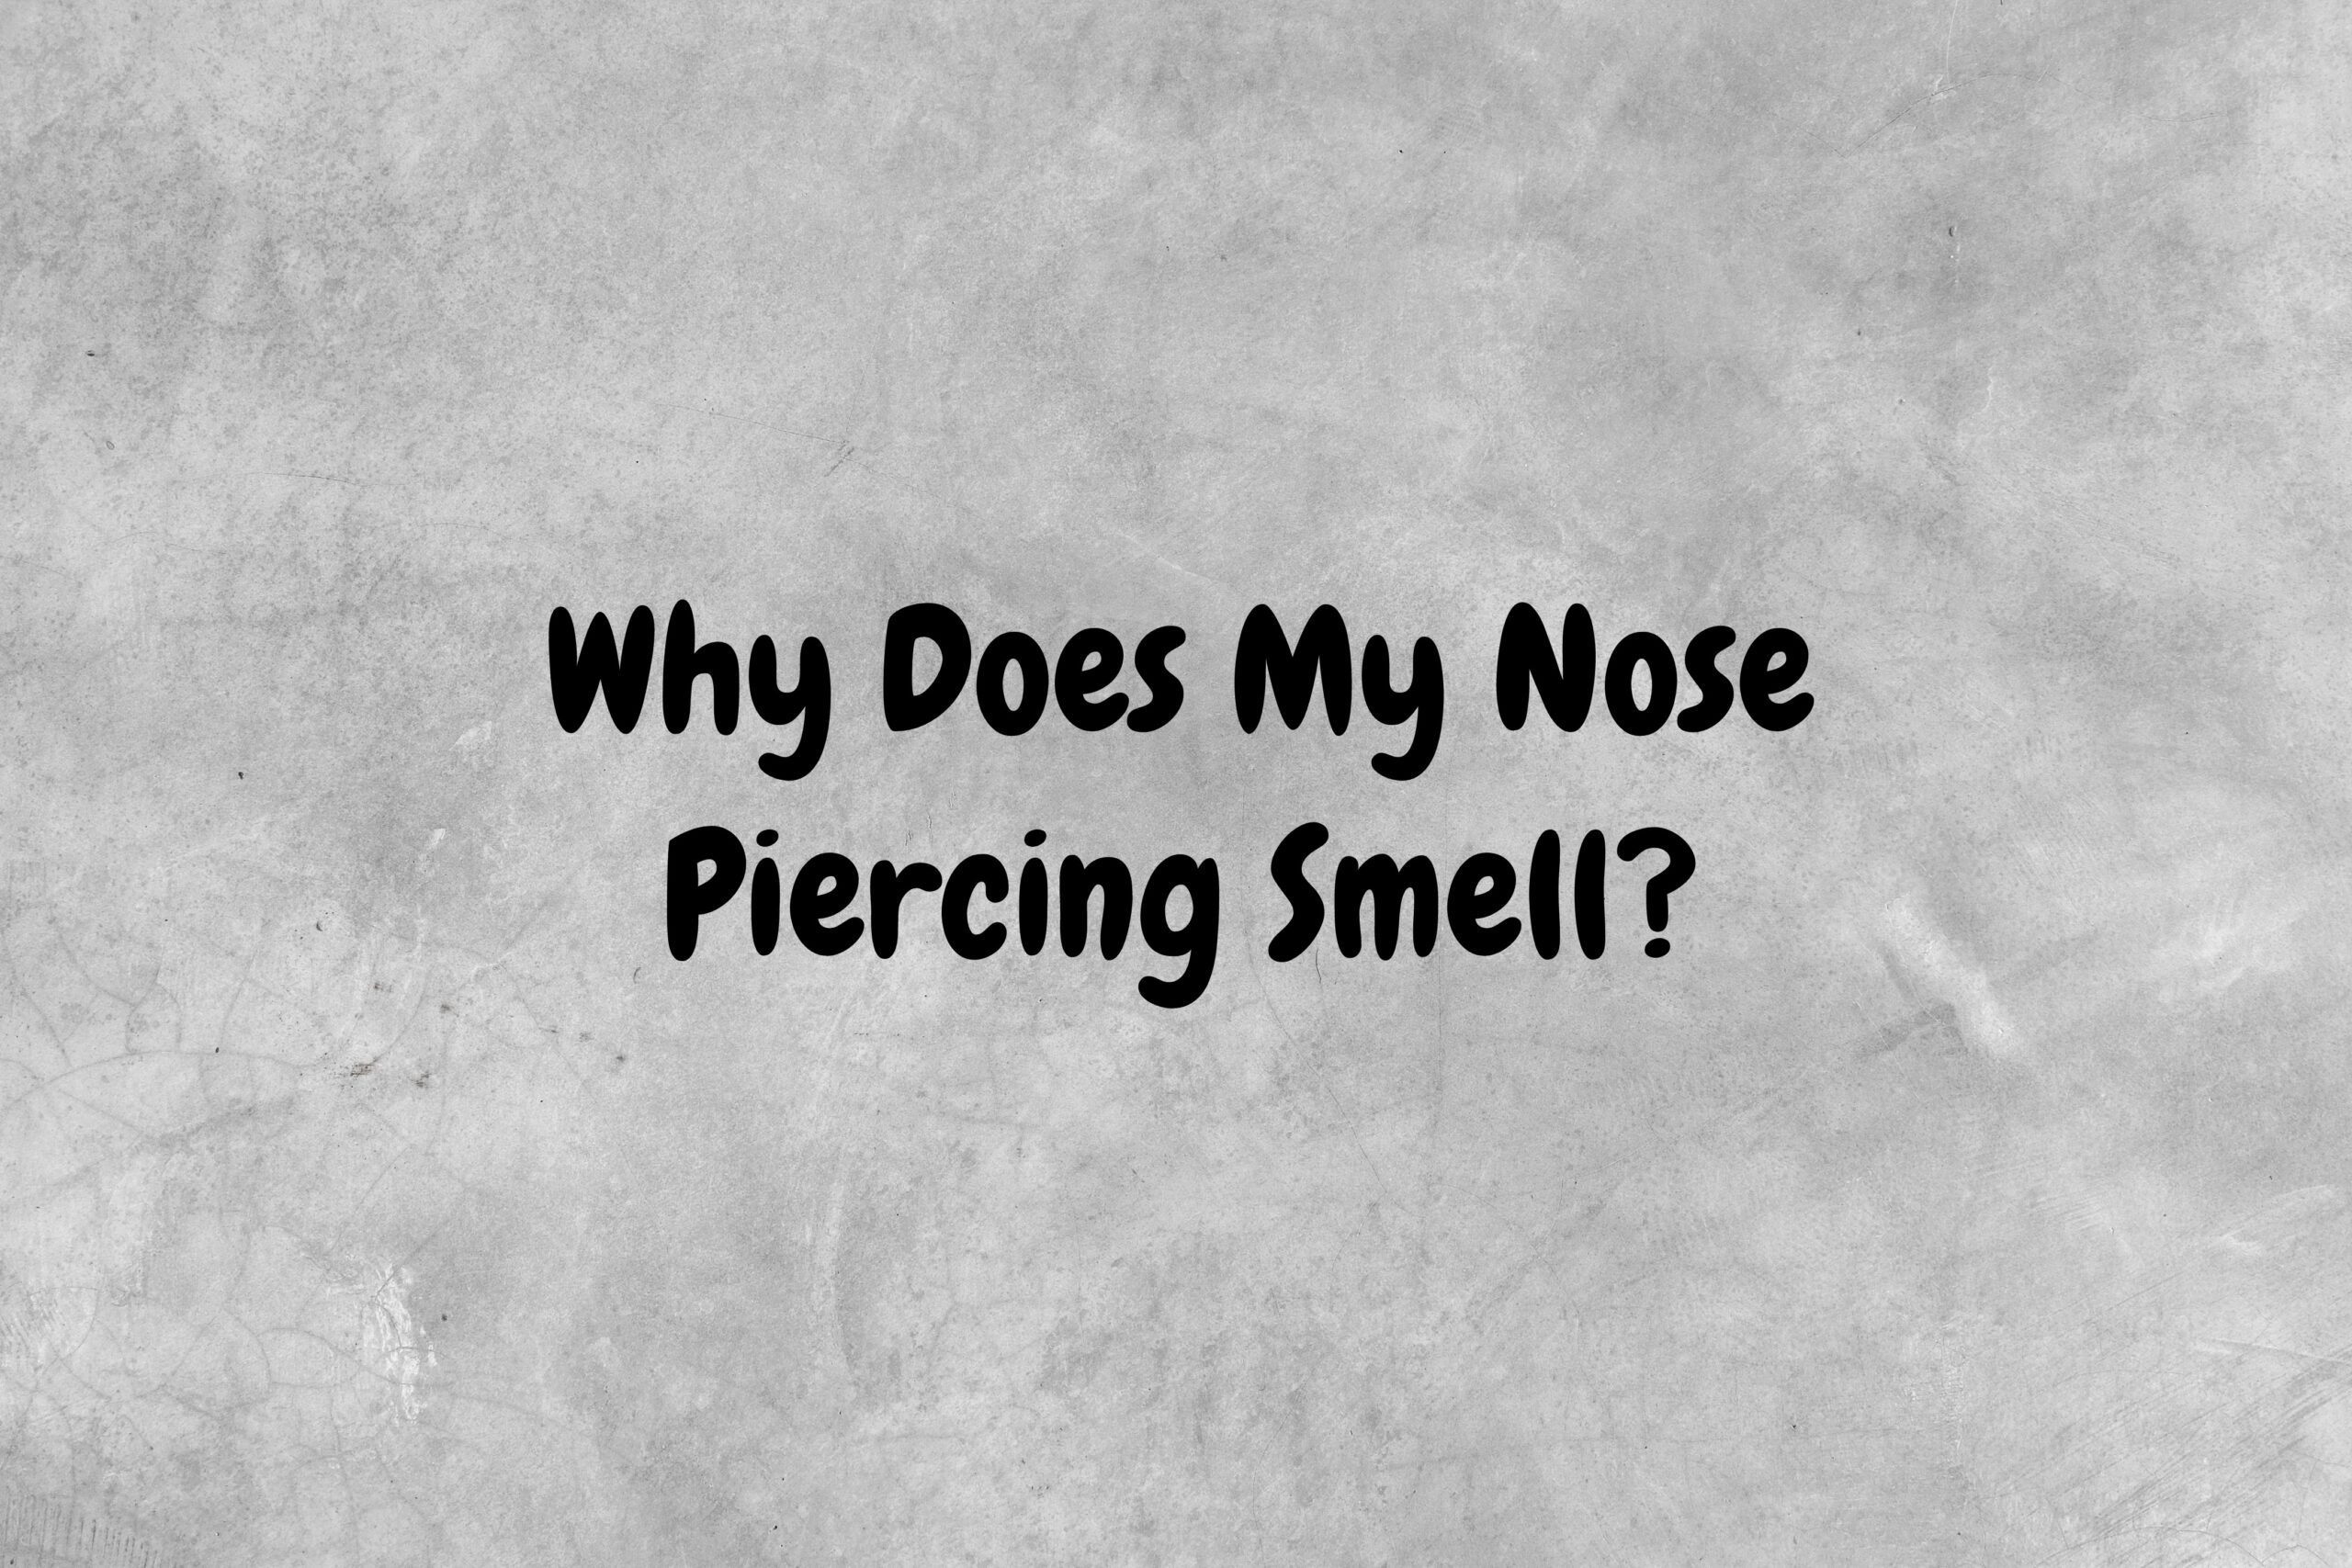 An image with a gray background and black text asking the question, "Why does my nose piercing smell? ".